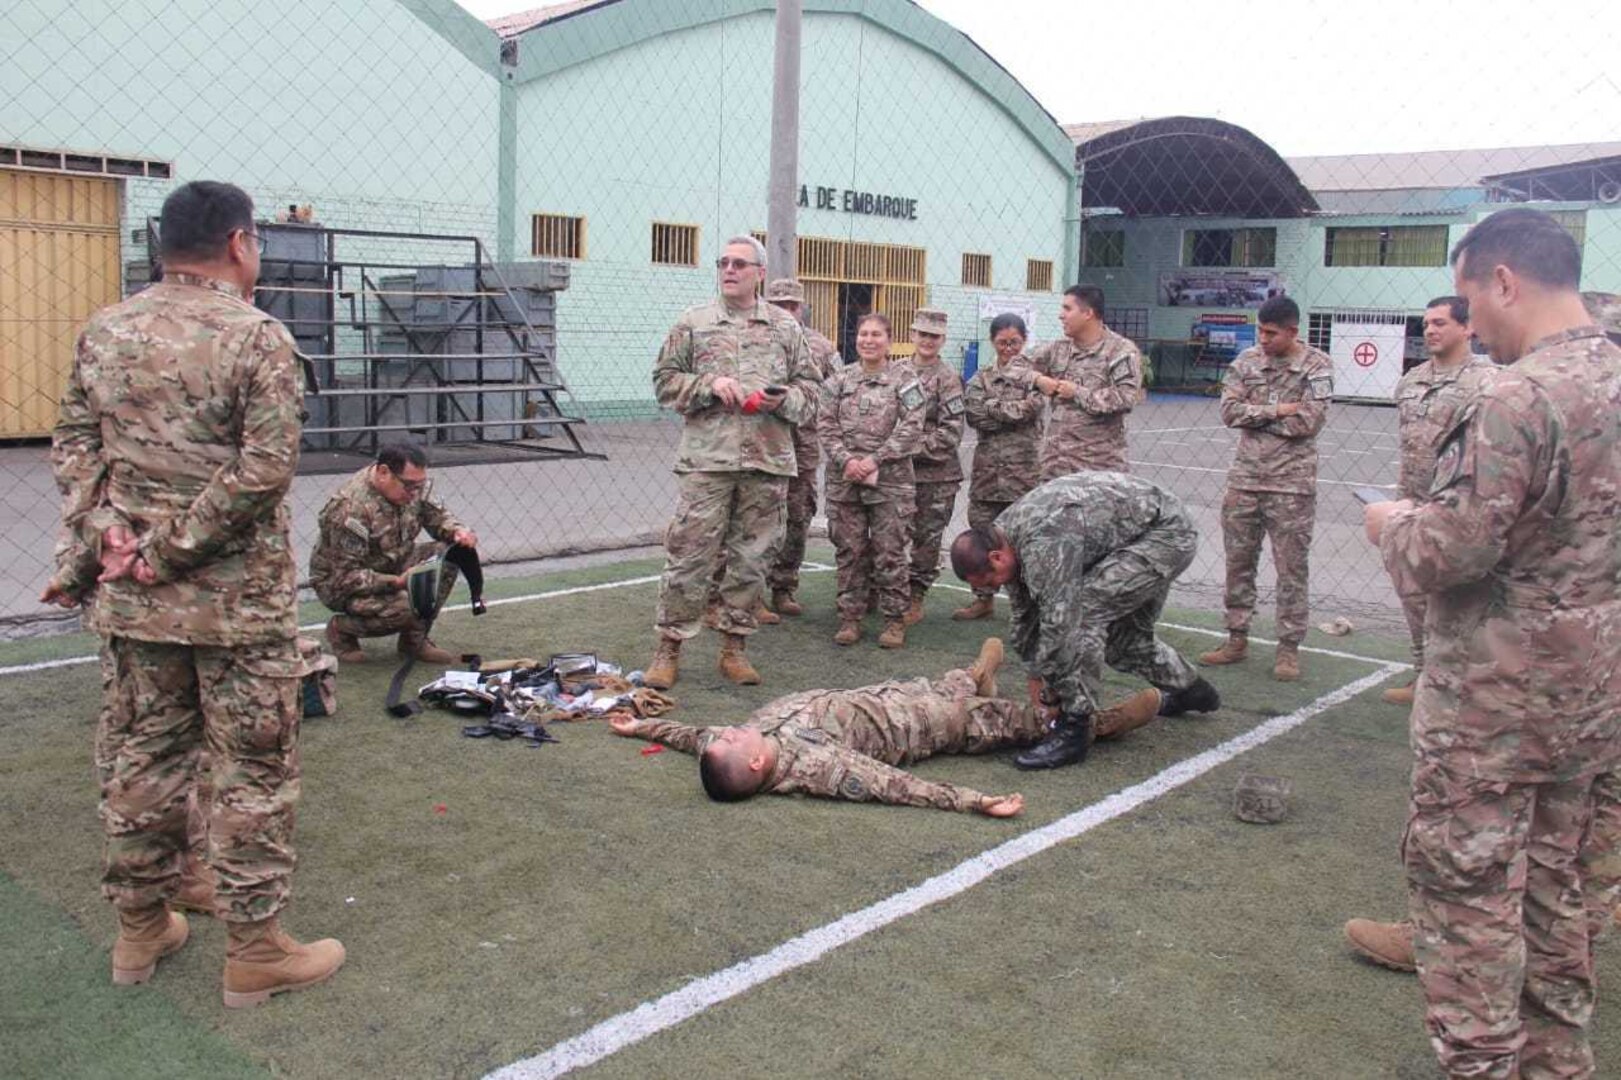 U.S. Army Col. Todd Fredricks, West Virginia Army National Guard (WVARNG) state surgeon, speaks with members of the Peruvian Armed Forces during a hands-on training sessions tactical casualty combat care (TCCC) July 2, 2019, in Lima, Peru. Members of the WVARNG trained more than 120 members of the Peruvian Armed Forces and the Peruvian National Police on a variety of aeromedical topics during a week-long subject matter exchange. (Courtesy photo)